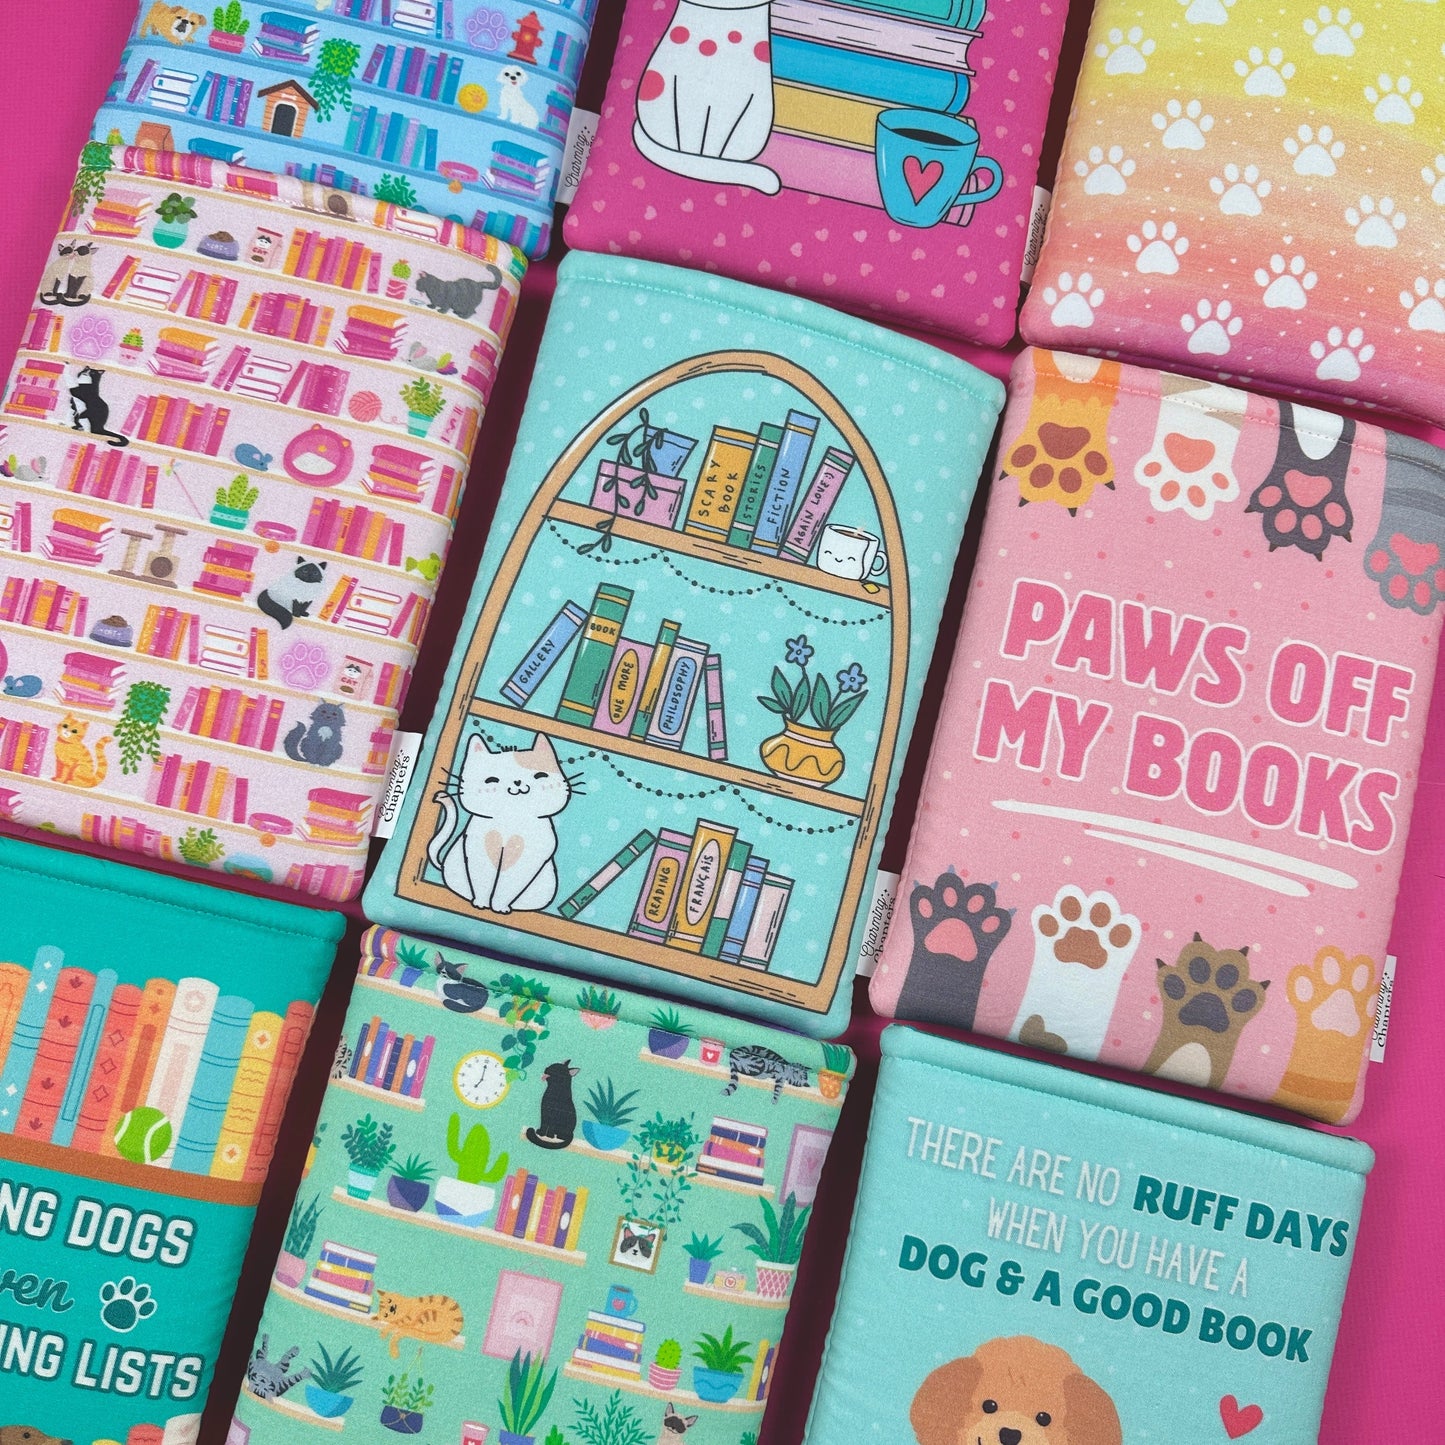 Paws Off My Books Book Sleeve